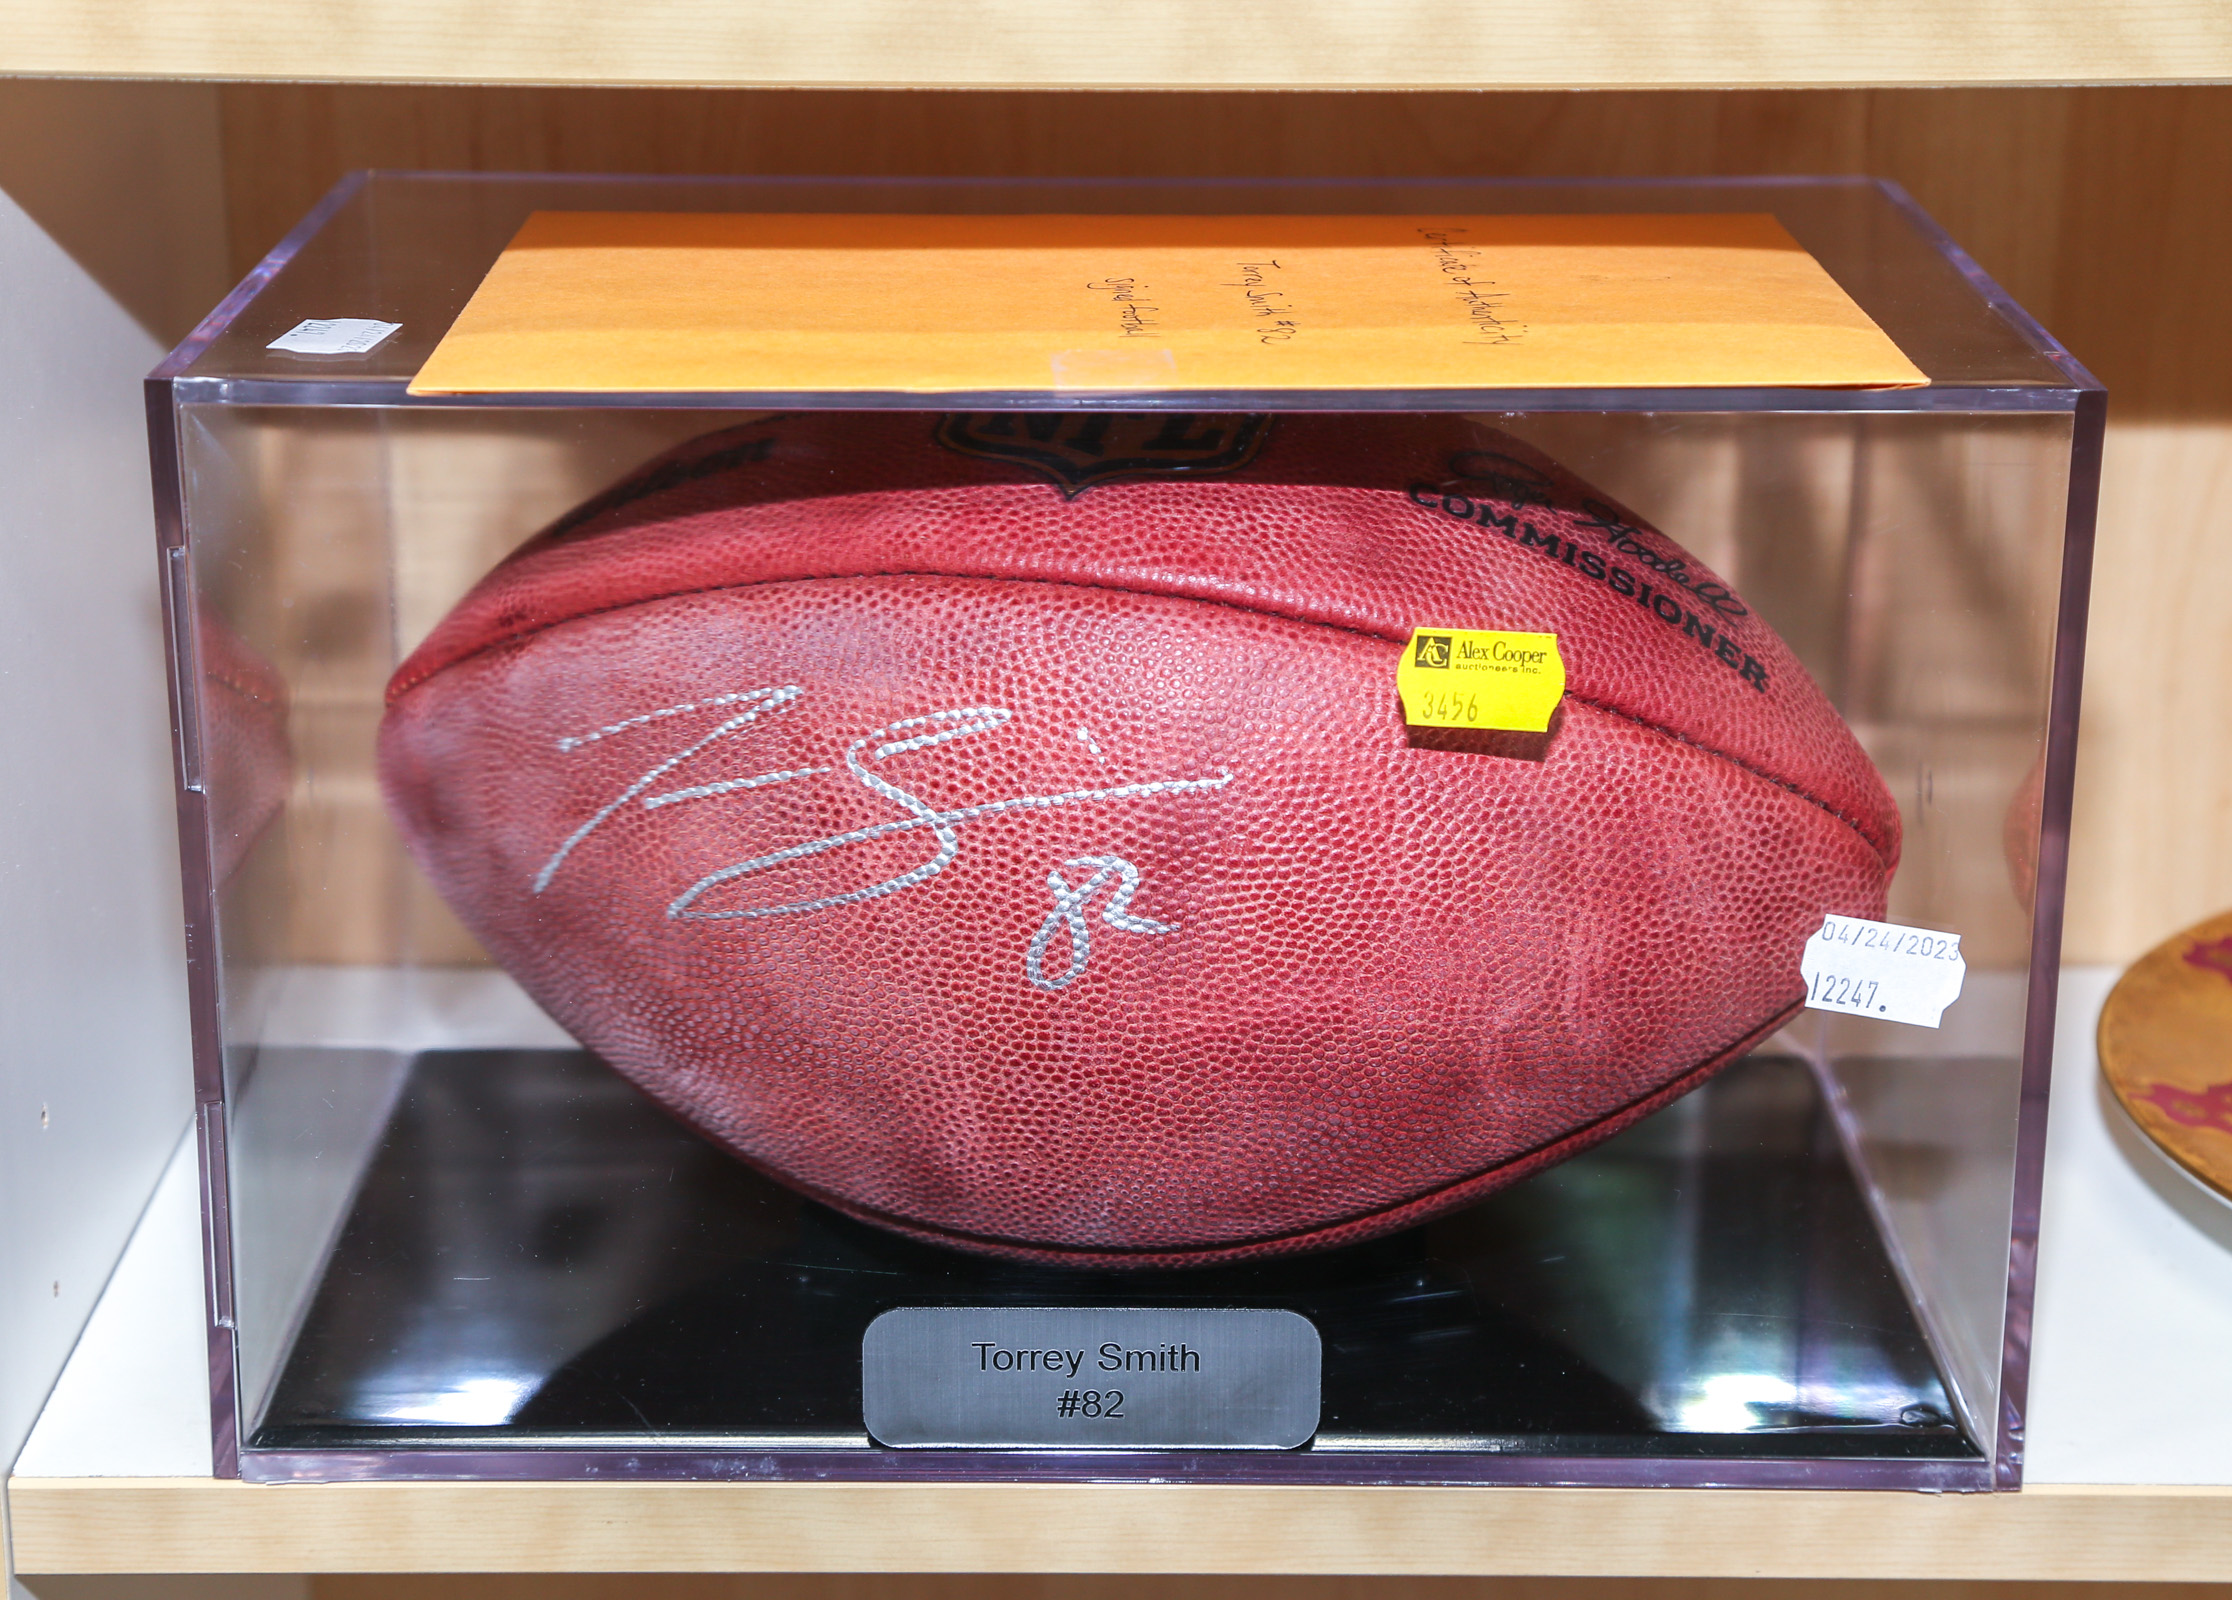 TORREY SMITH SIGNED FOOTBALL In a lucite